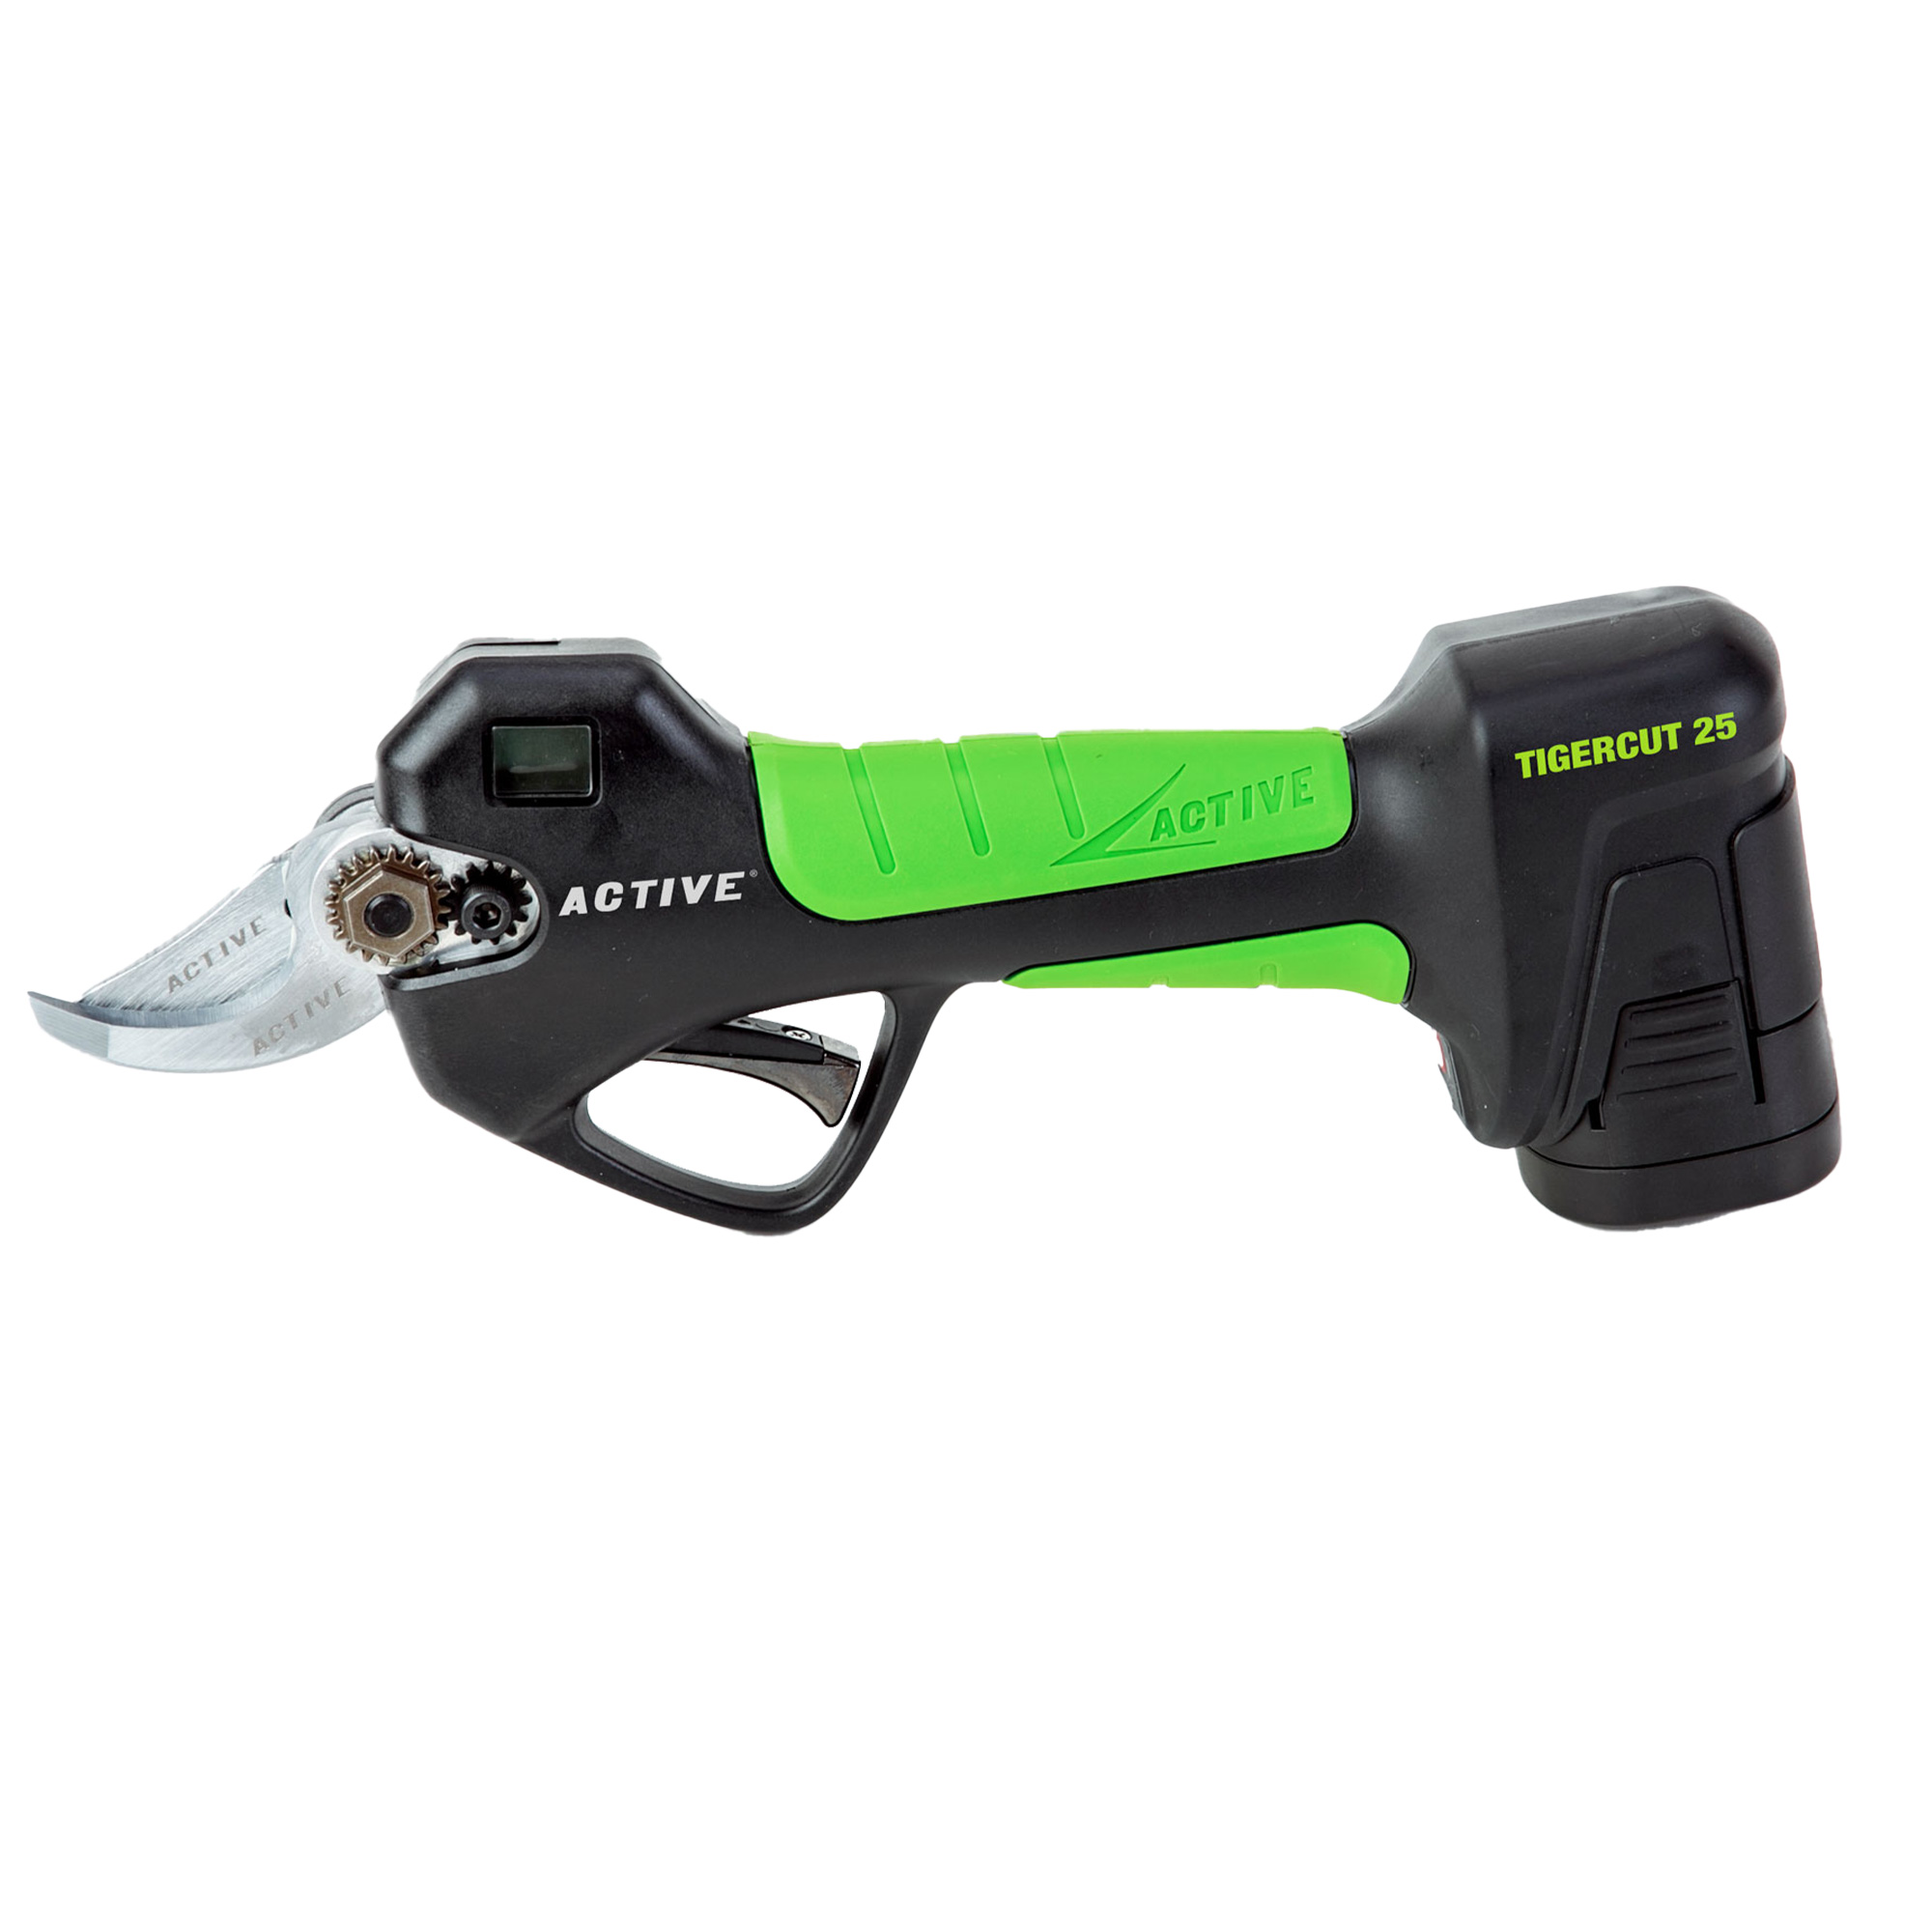 TIGERCUT 25 - Battery shears TC-25 cordless - incl. spare battery pack